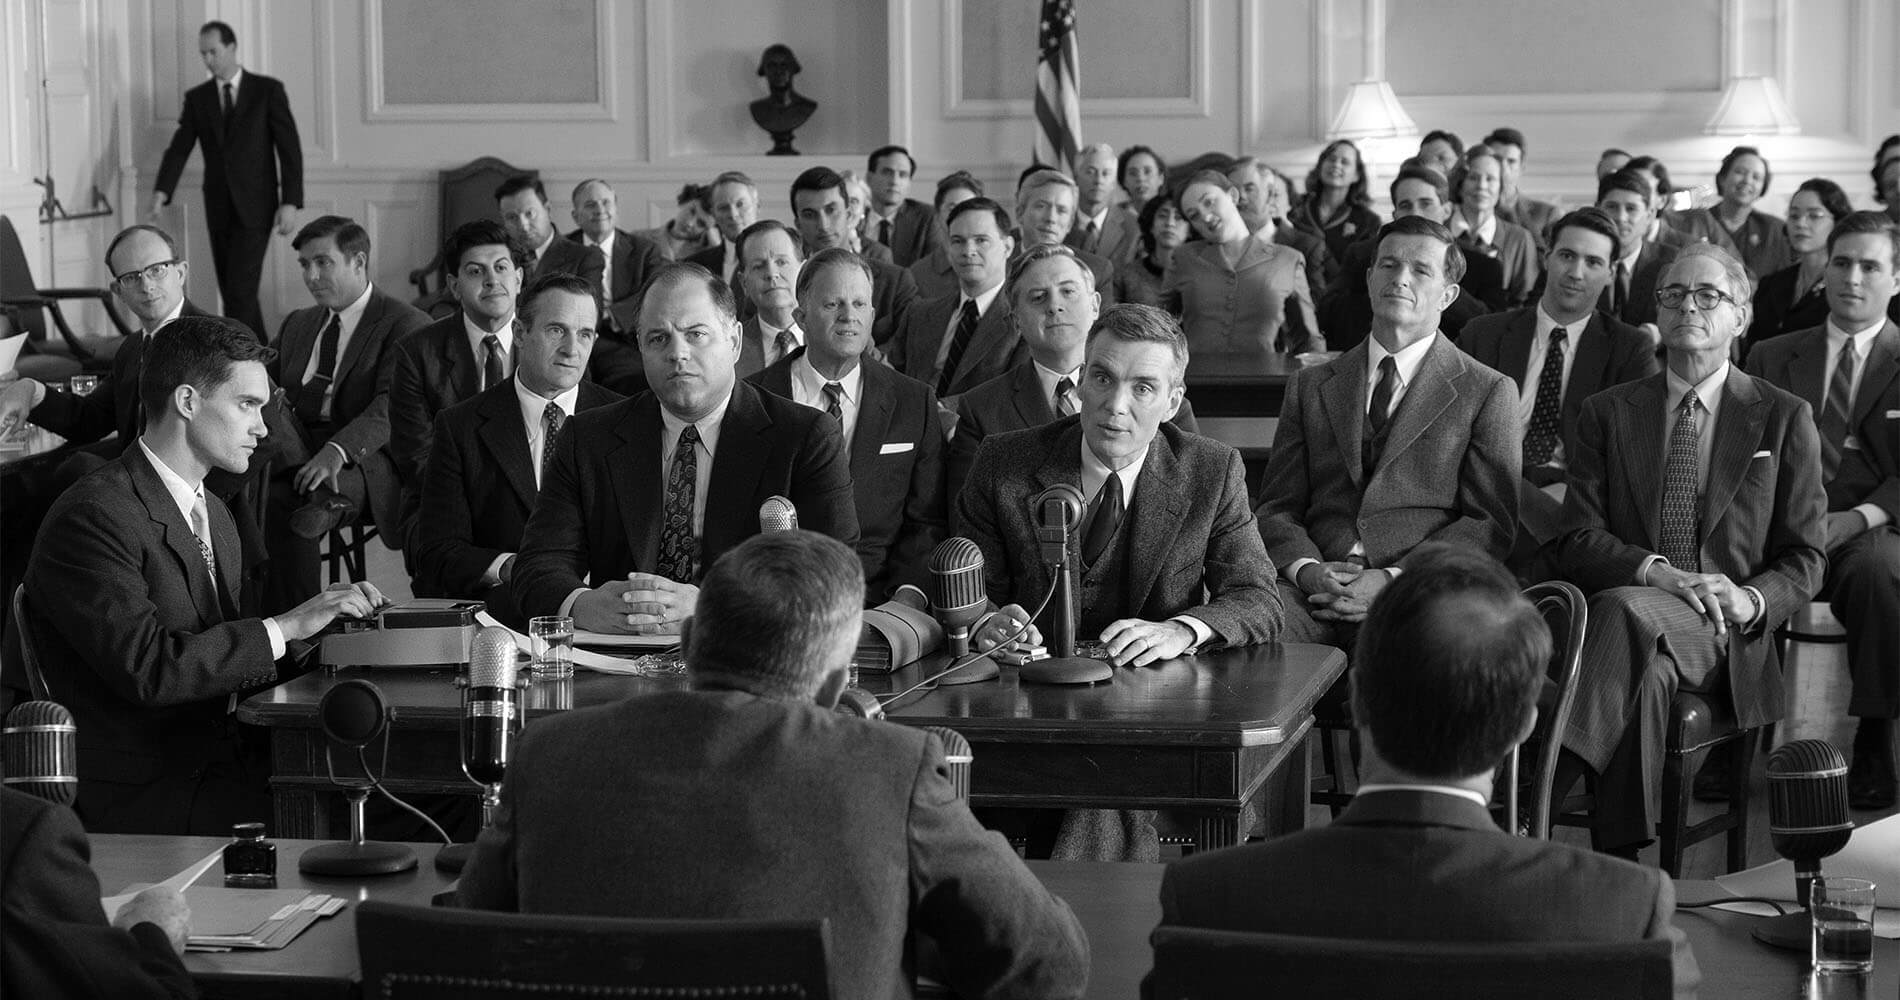 In a key scene in <i>Oppenheimer,</i> the physicist embarrasses Strauss before the Joint Committee on Atomic Energy, prompting Strauss' crusade to humiliate Oppenheimer.
